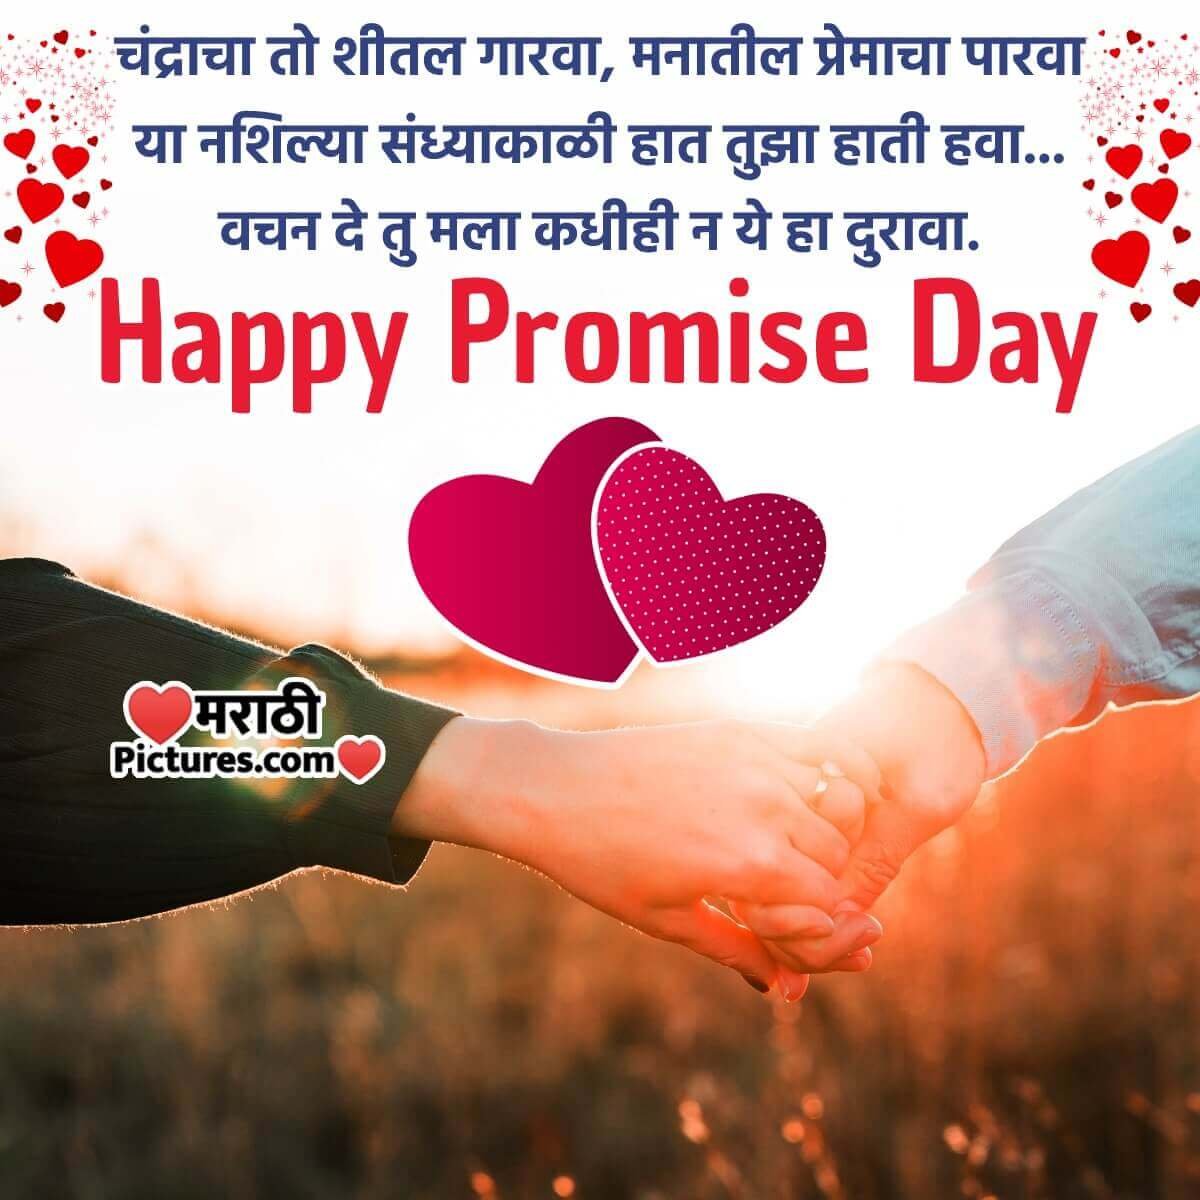 Happy Promise Day Greeting Image